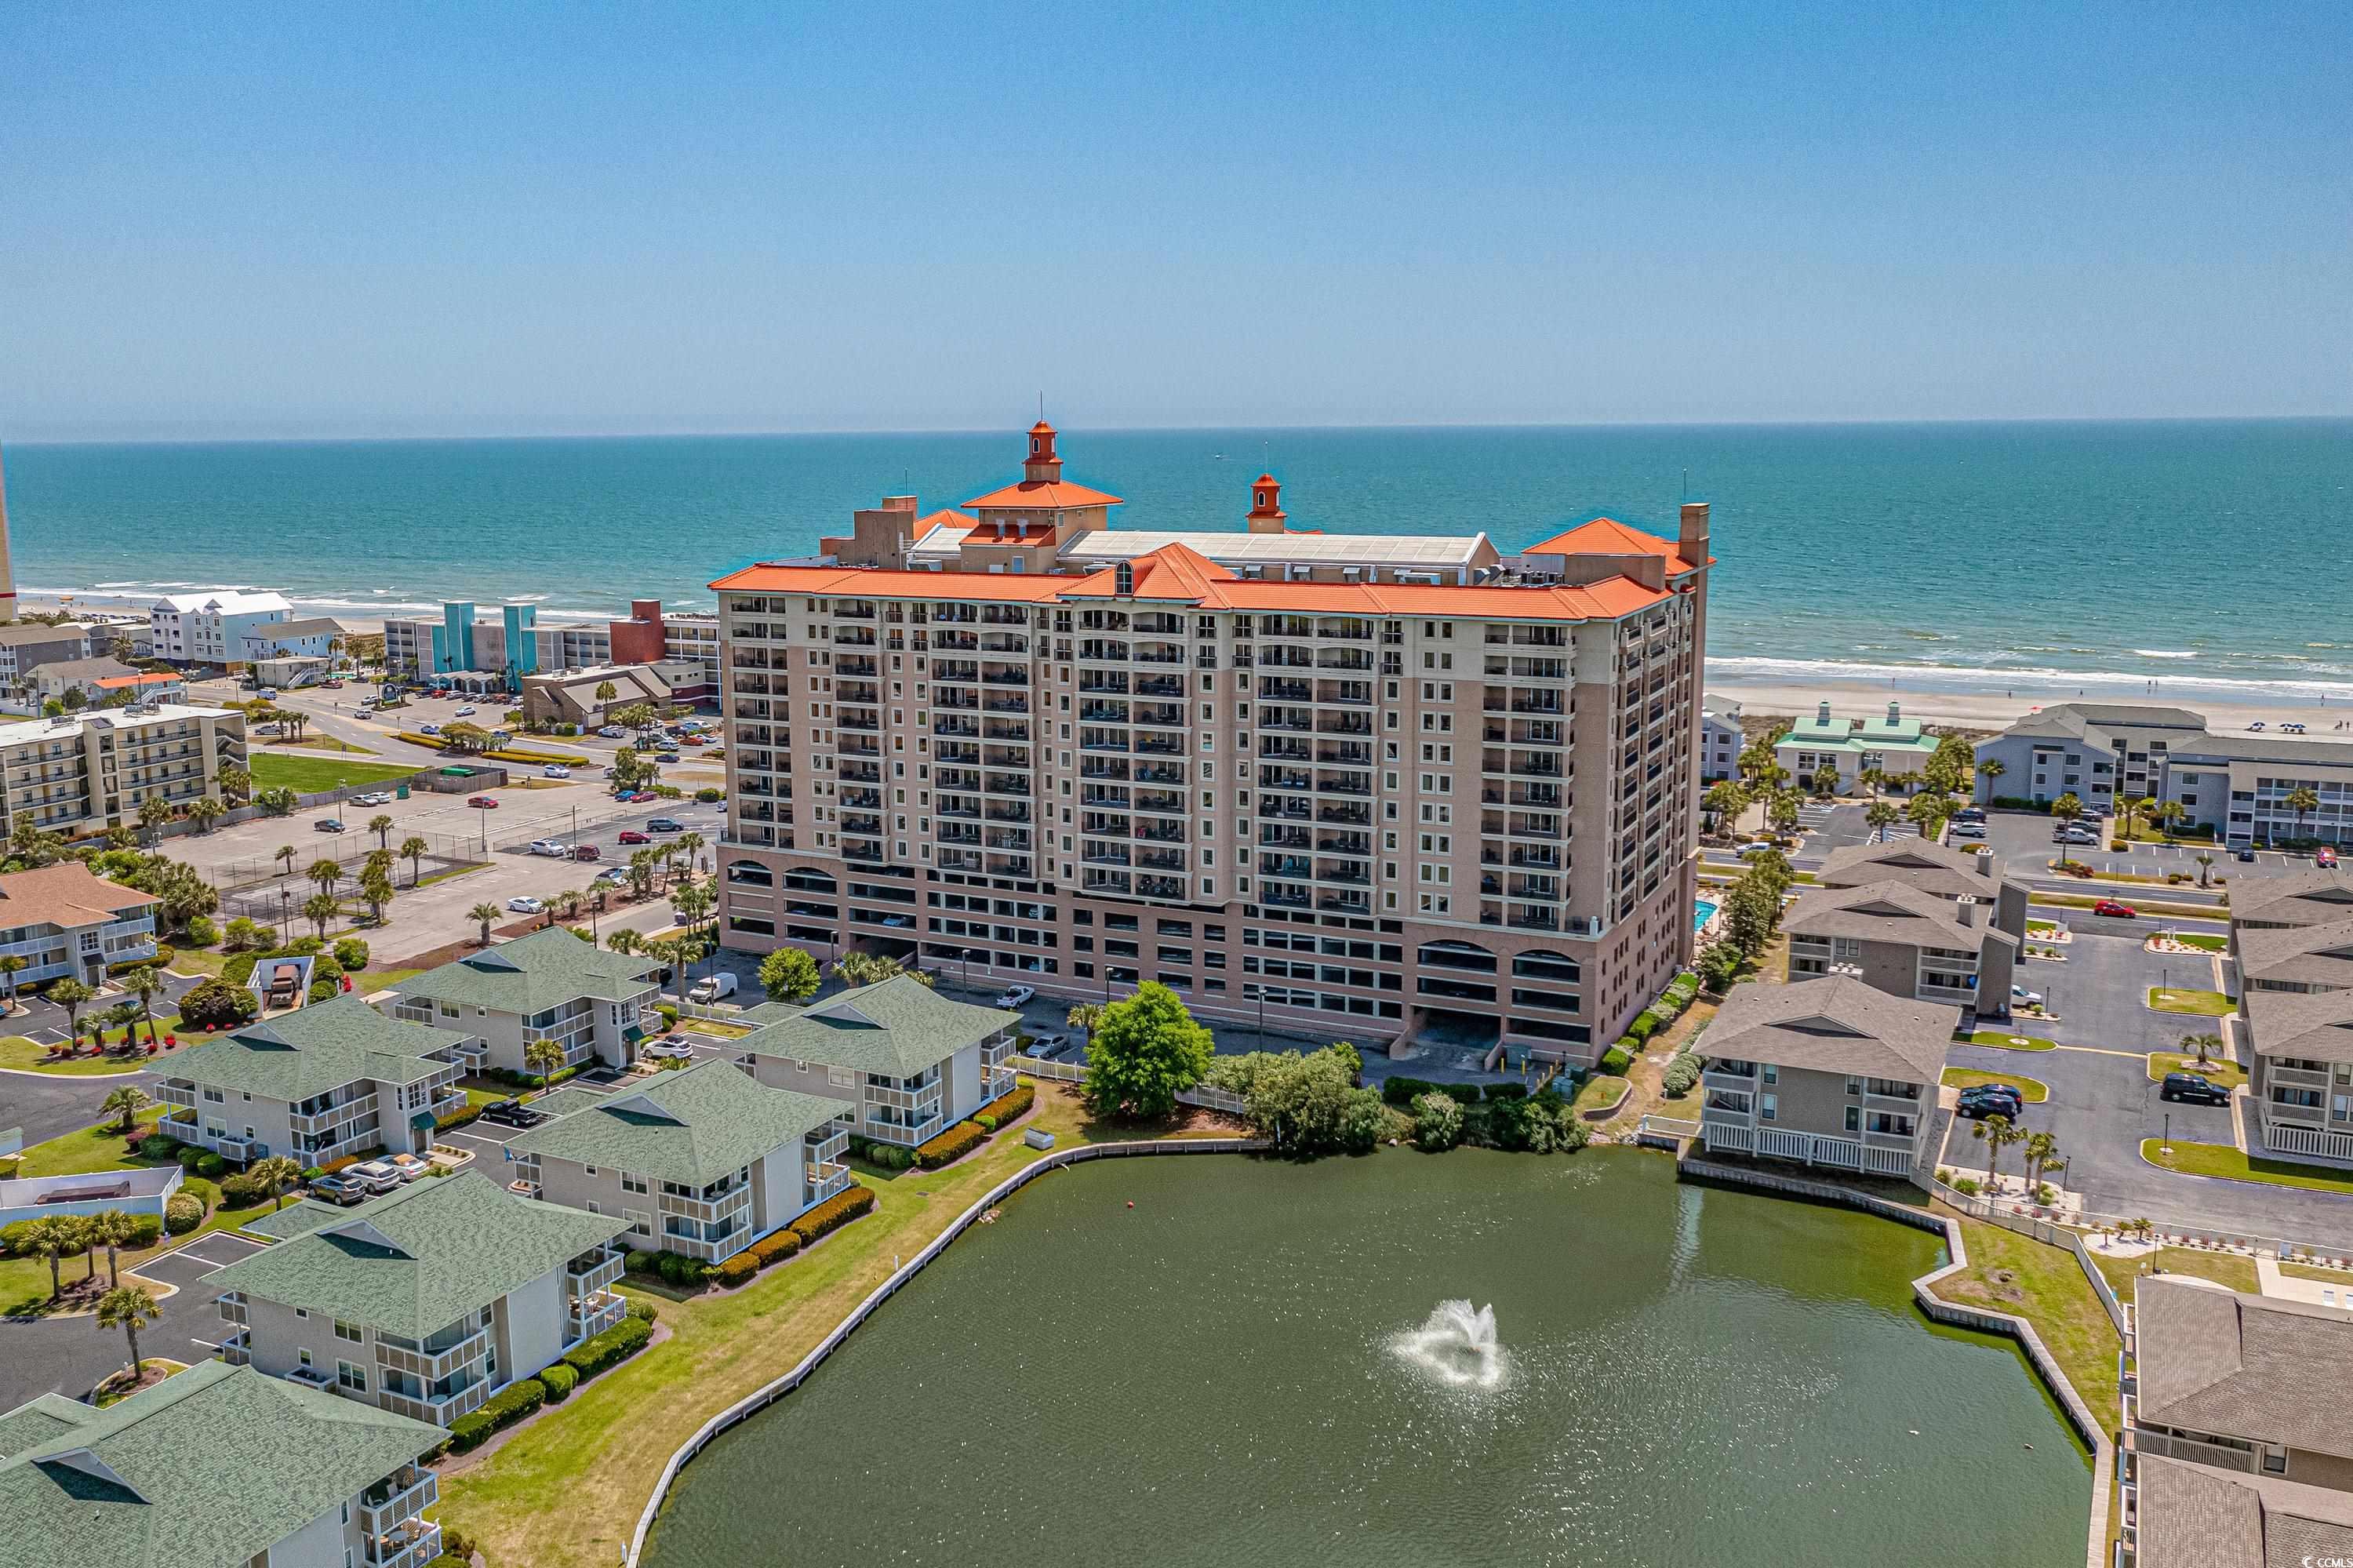 a breath taking views of the surf golf & beach golf course, lake with a fountain and marsh views from this beautiful 12th floor recently updated unit,  located in the one of the most desirable tilghman beach & golf resorts. not one thing was overlooked by the owner and the resort for their owners and their guests to make their stay absolutely enjoyable. the unit was recently painted, new laminate flooring was installed, completely new high capacity carrier hvac installed in 2023, unit also has a reme halo air purifier that reduces bacteria, viruses, odors, and mold spores in the air and on surfaces, all bifold closet doors have been replaced with new versions that look like regular doors, a 6-stage reverse osmosis water filter under the kitchen sink with a mounted faucet provides chemical-free drinking and cooking water, the fridge has a filter on it for ice. the resort is small-dog friendly for owners and there is a grassy pet area outside, there is golf cart charging station for their owners, the  building offers a sauna, indoor heated pool, fitness center, outdoor pool, splash pad, lazy river, and a bar/grill, 5th floor of the property has an atrium, building is directly across from the ocean, the walk way to the ocean includes crossing buttons and strobe lights to stop traffic.the beach access across the street is paved and includes permanent bathrooms.there is a beach bar directly on the beach access across the street. do not wait to make this absolutely worry free, conveniently located to all main attractions condo yours.